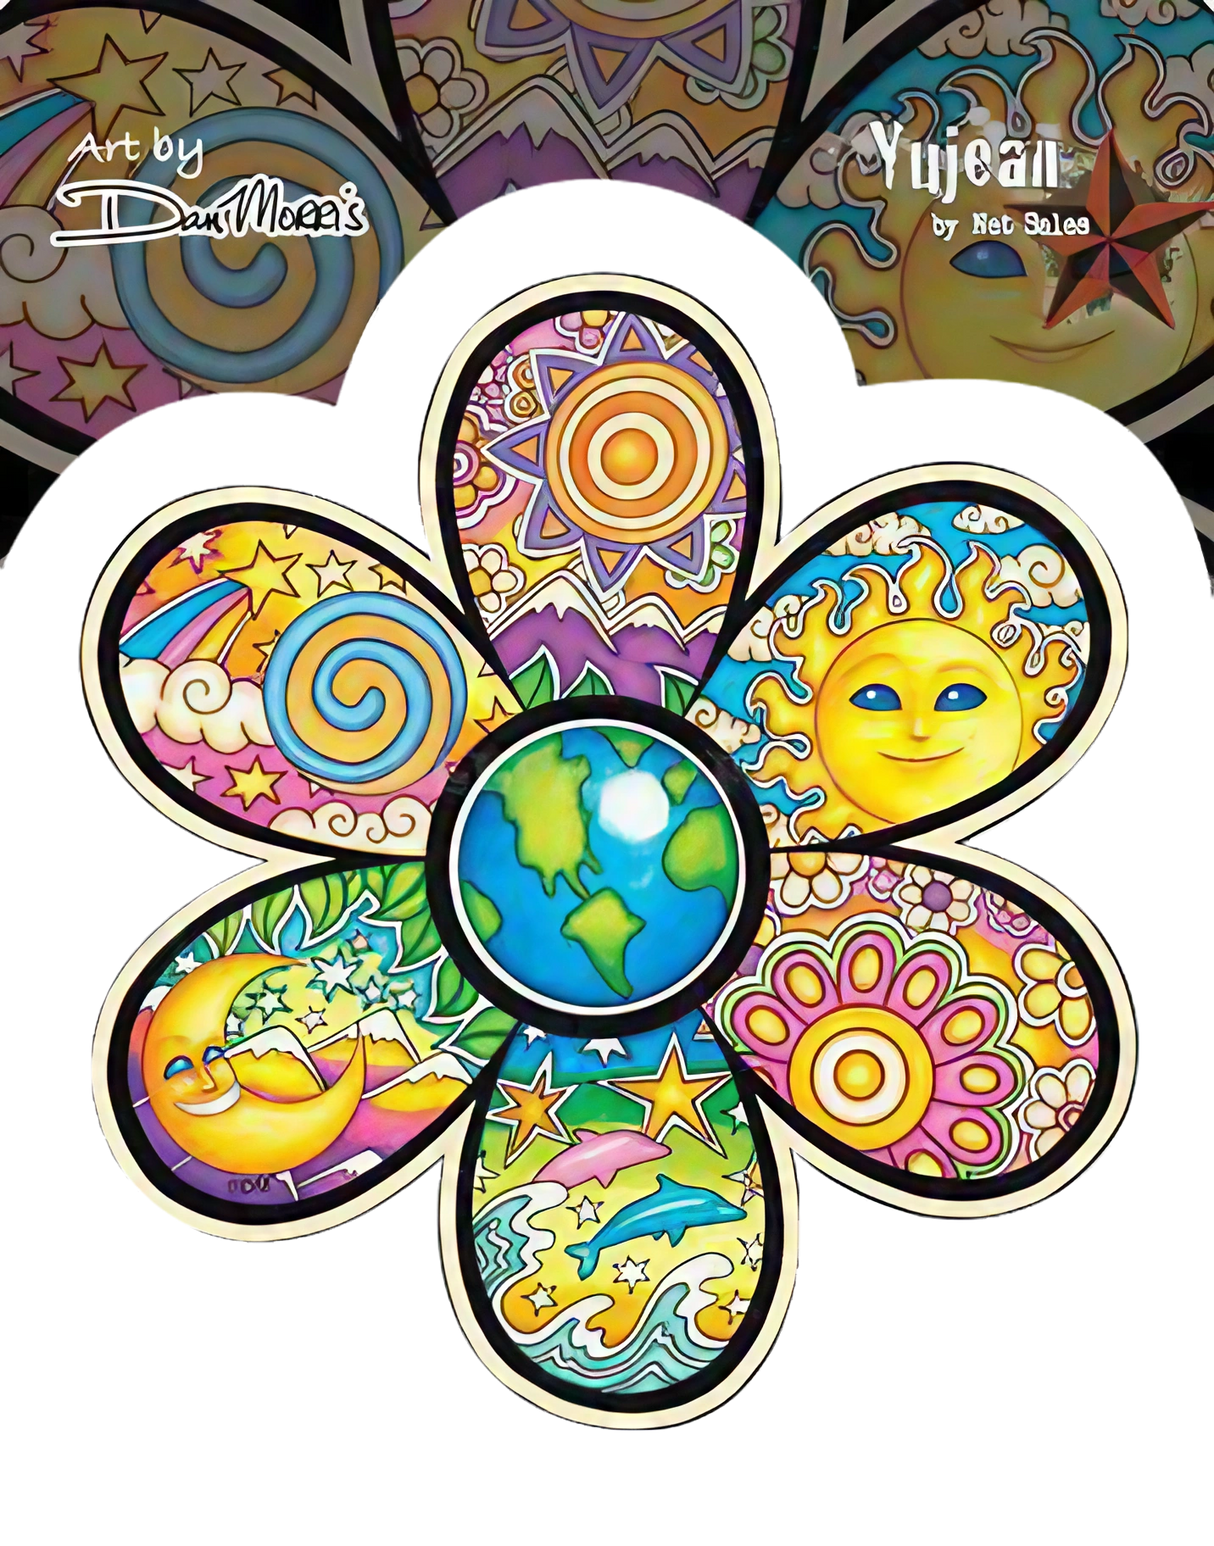 Dan Morris 'Earth Flower' Sticker featuring colorful, psychedelic design, perfect for indoor/outdoor use